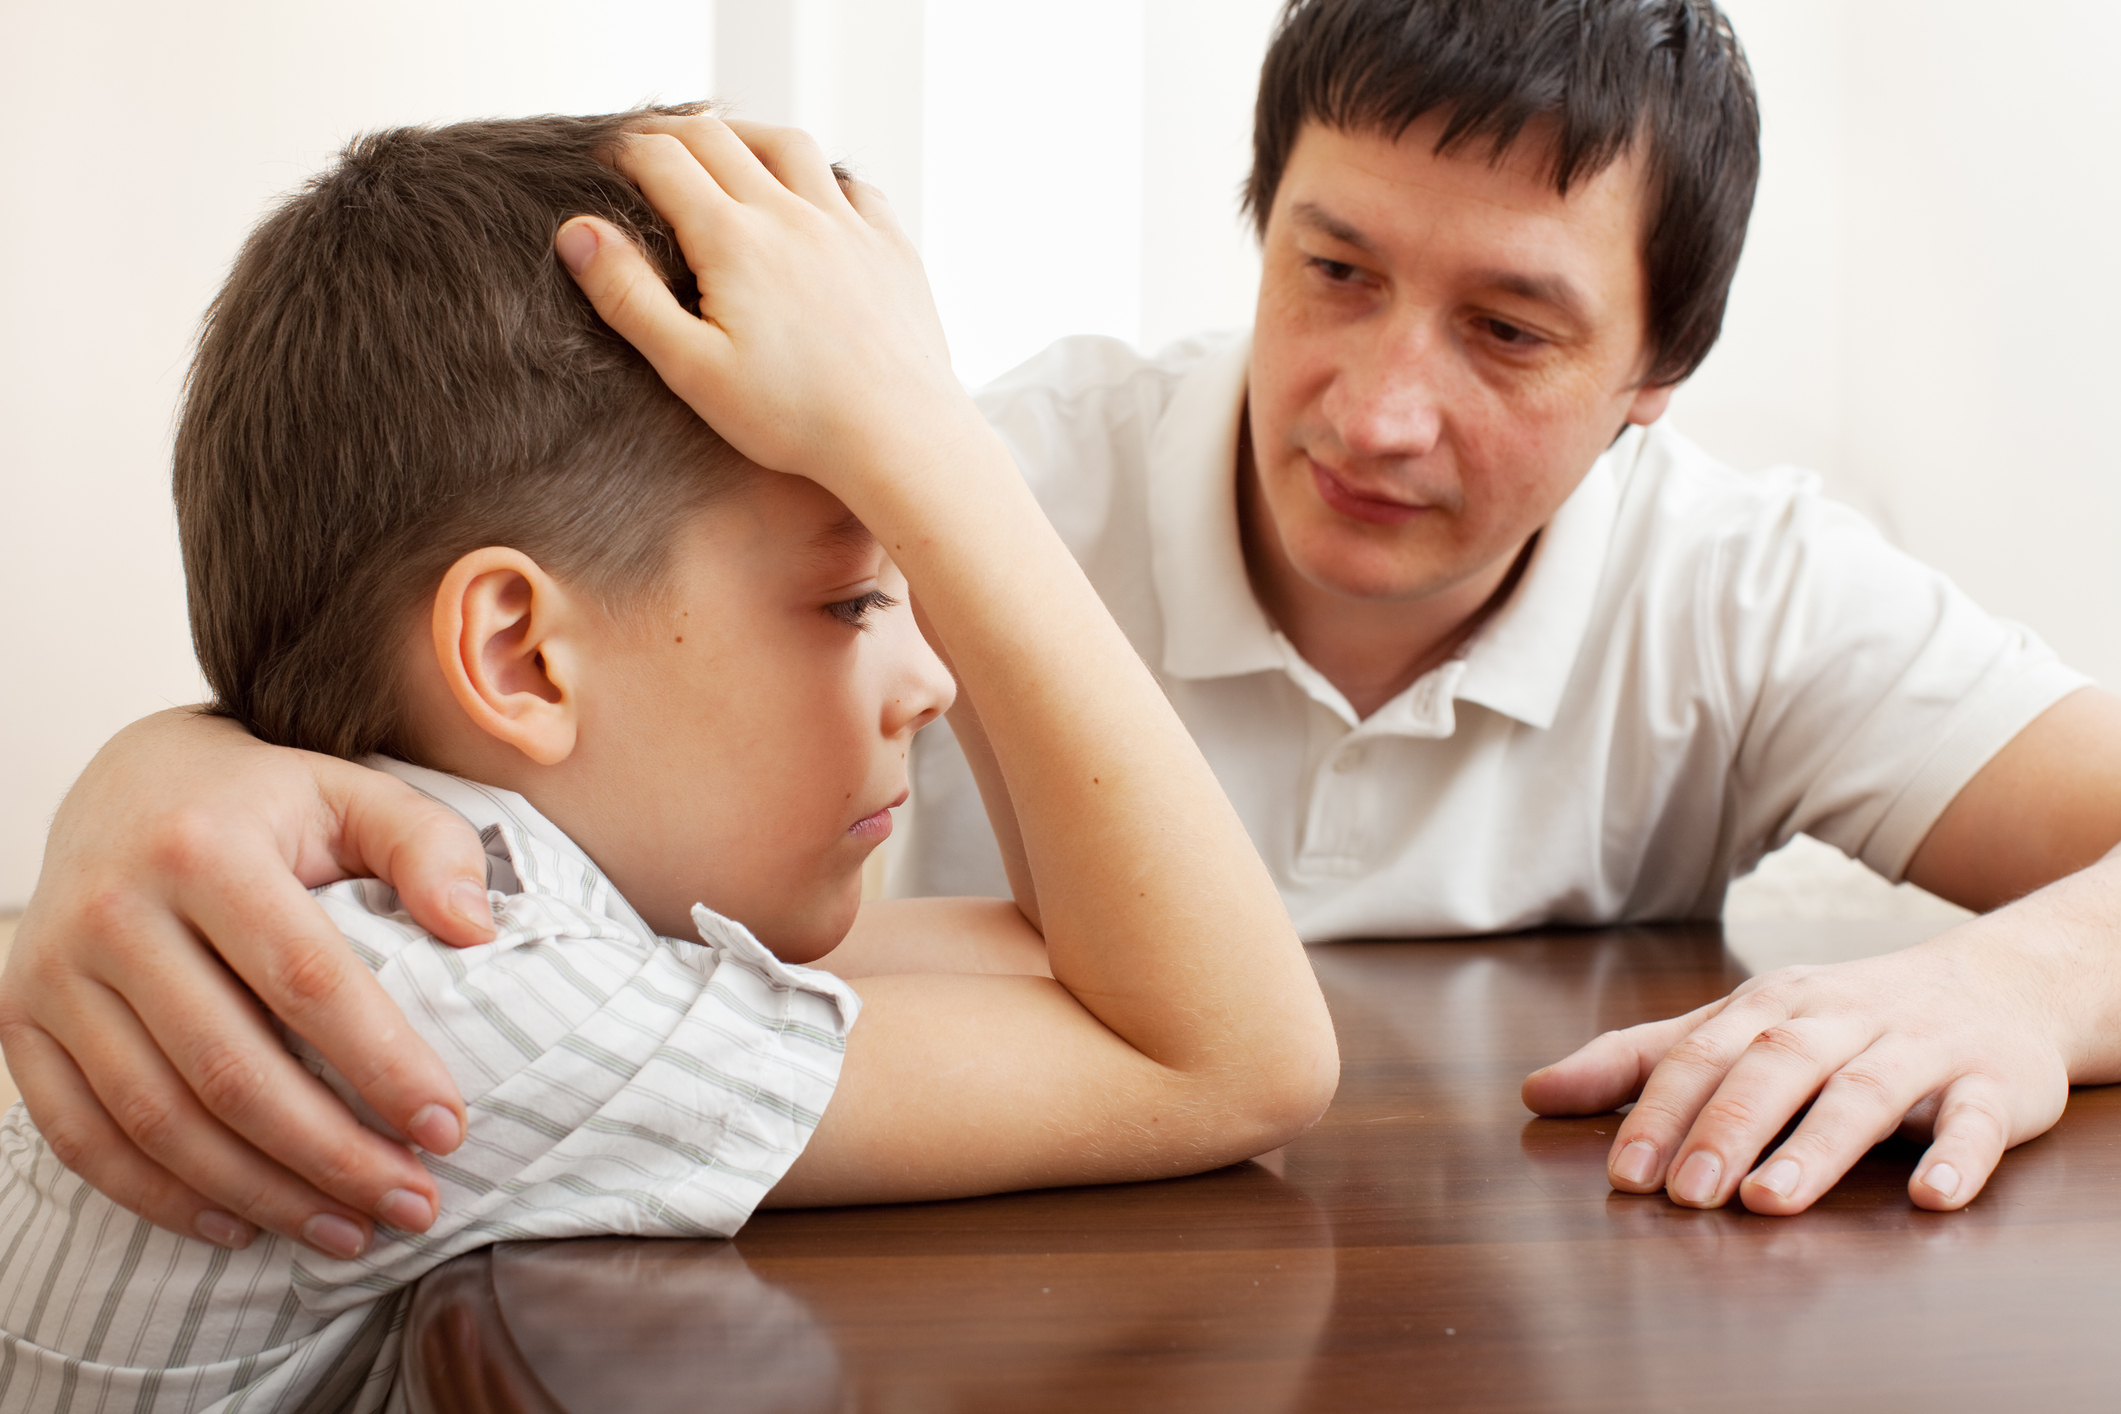 Does Forcing Kids to Say “I’m Sorry” Teach Them to Lie?